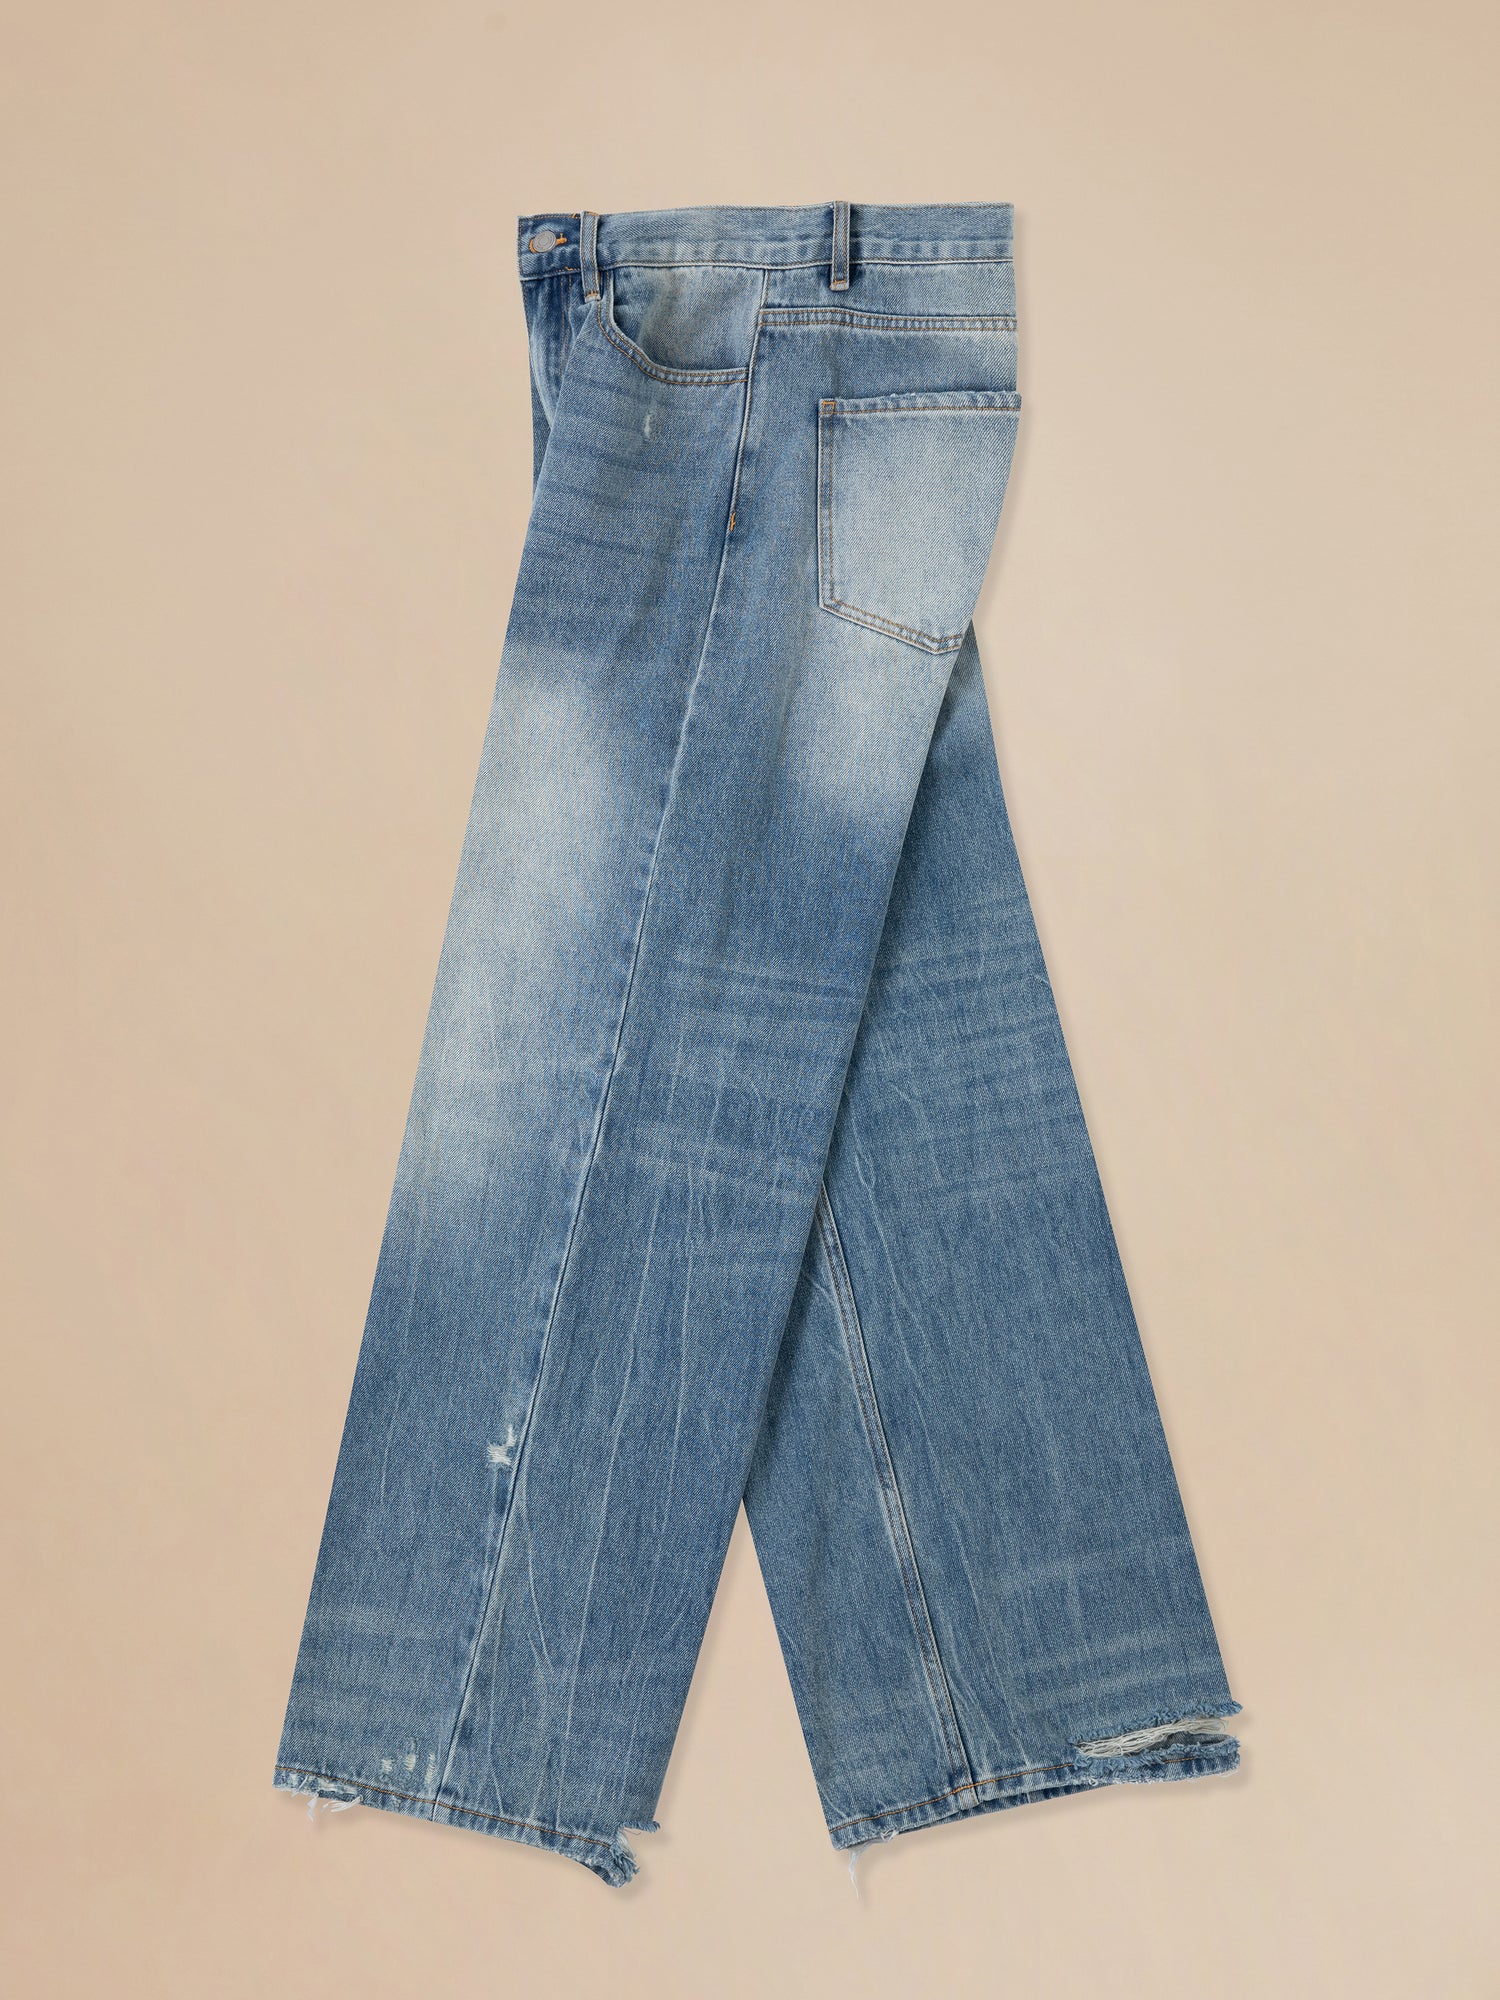 A pair of Found Lacy Baggy Jeans Blue with frayed edges.